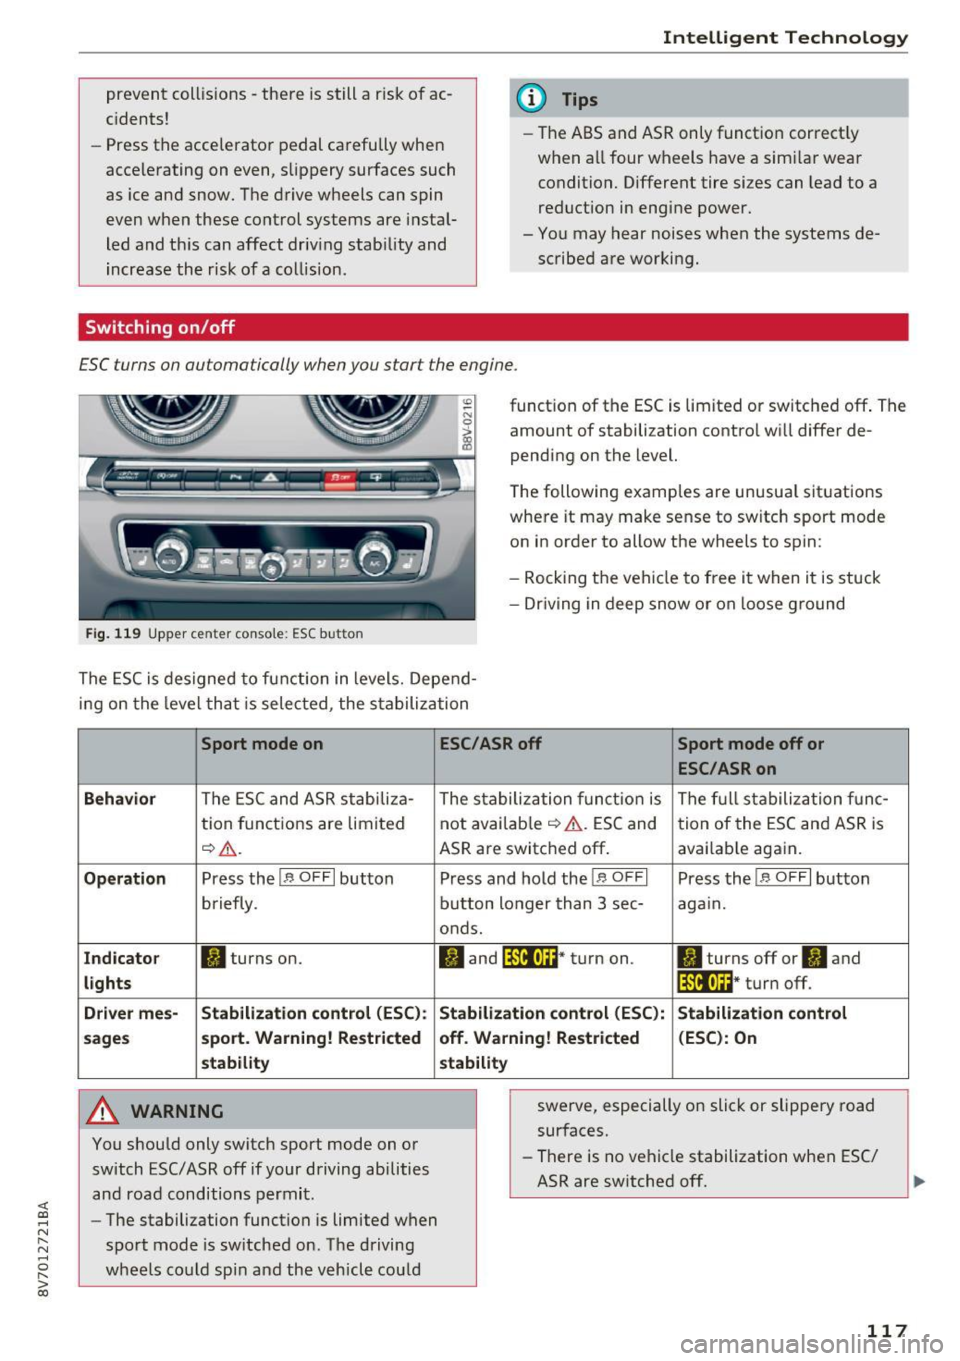 AUDI A3 CABRIOLET 2016  Owners Manual <( co ..... N 
" N ..... 0 r--. > 00 
prevent  collisions -there  is still  a risk of  ac­
cidents! 
- Press the  accelerator  pedal carefully  when 
accelerating  on even, slippery  surfaces such 
a